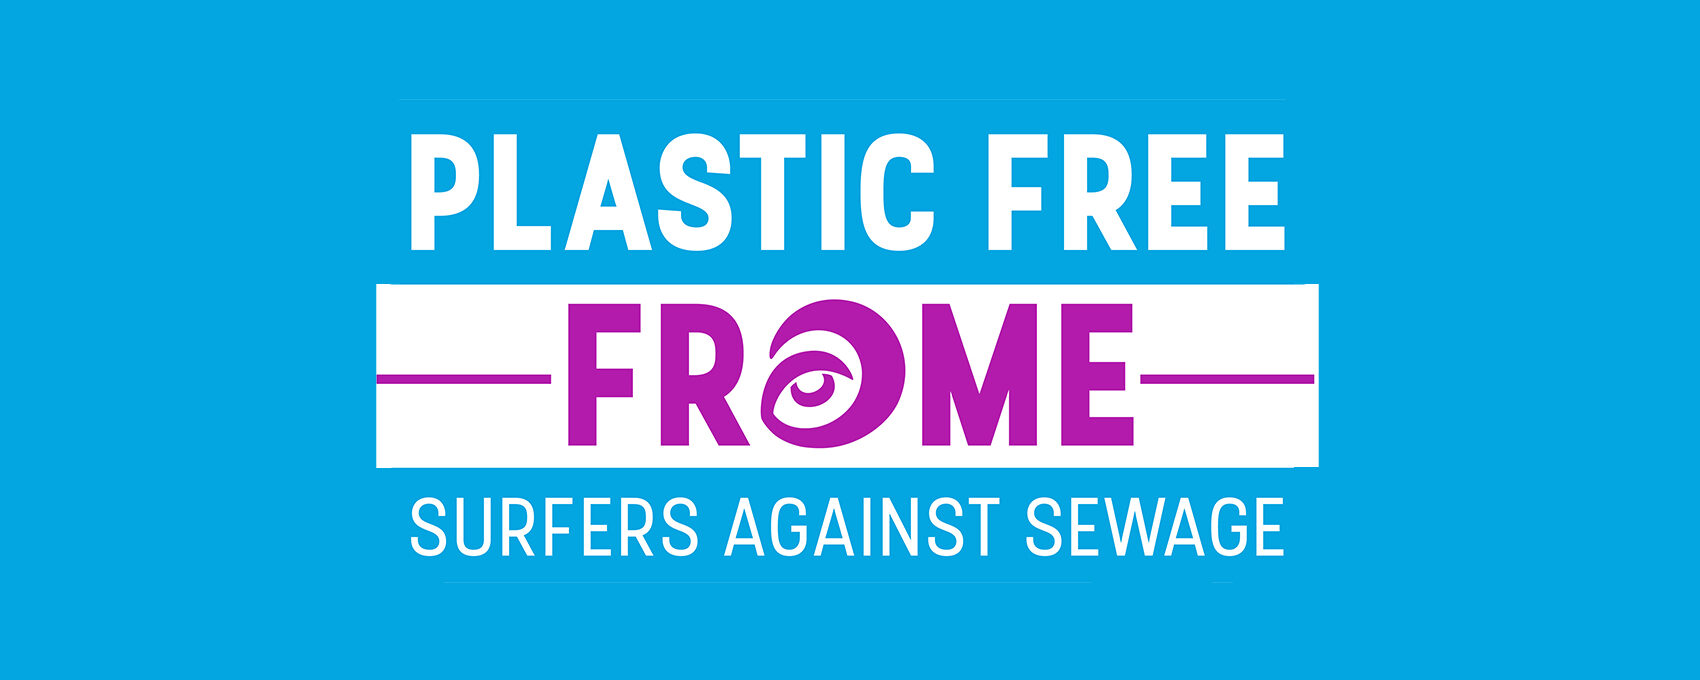 Plastic Free Frome Logo